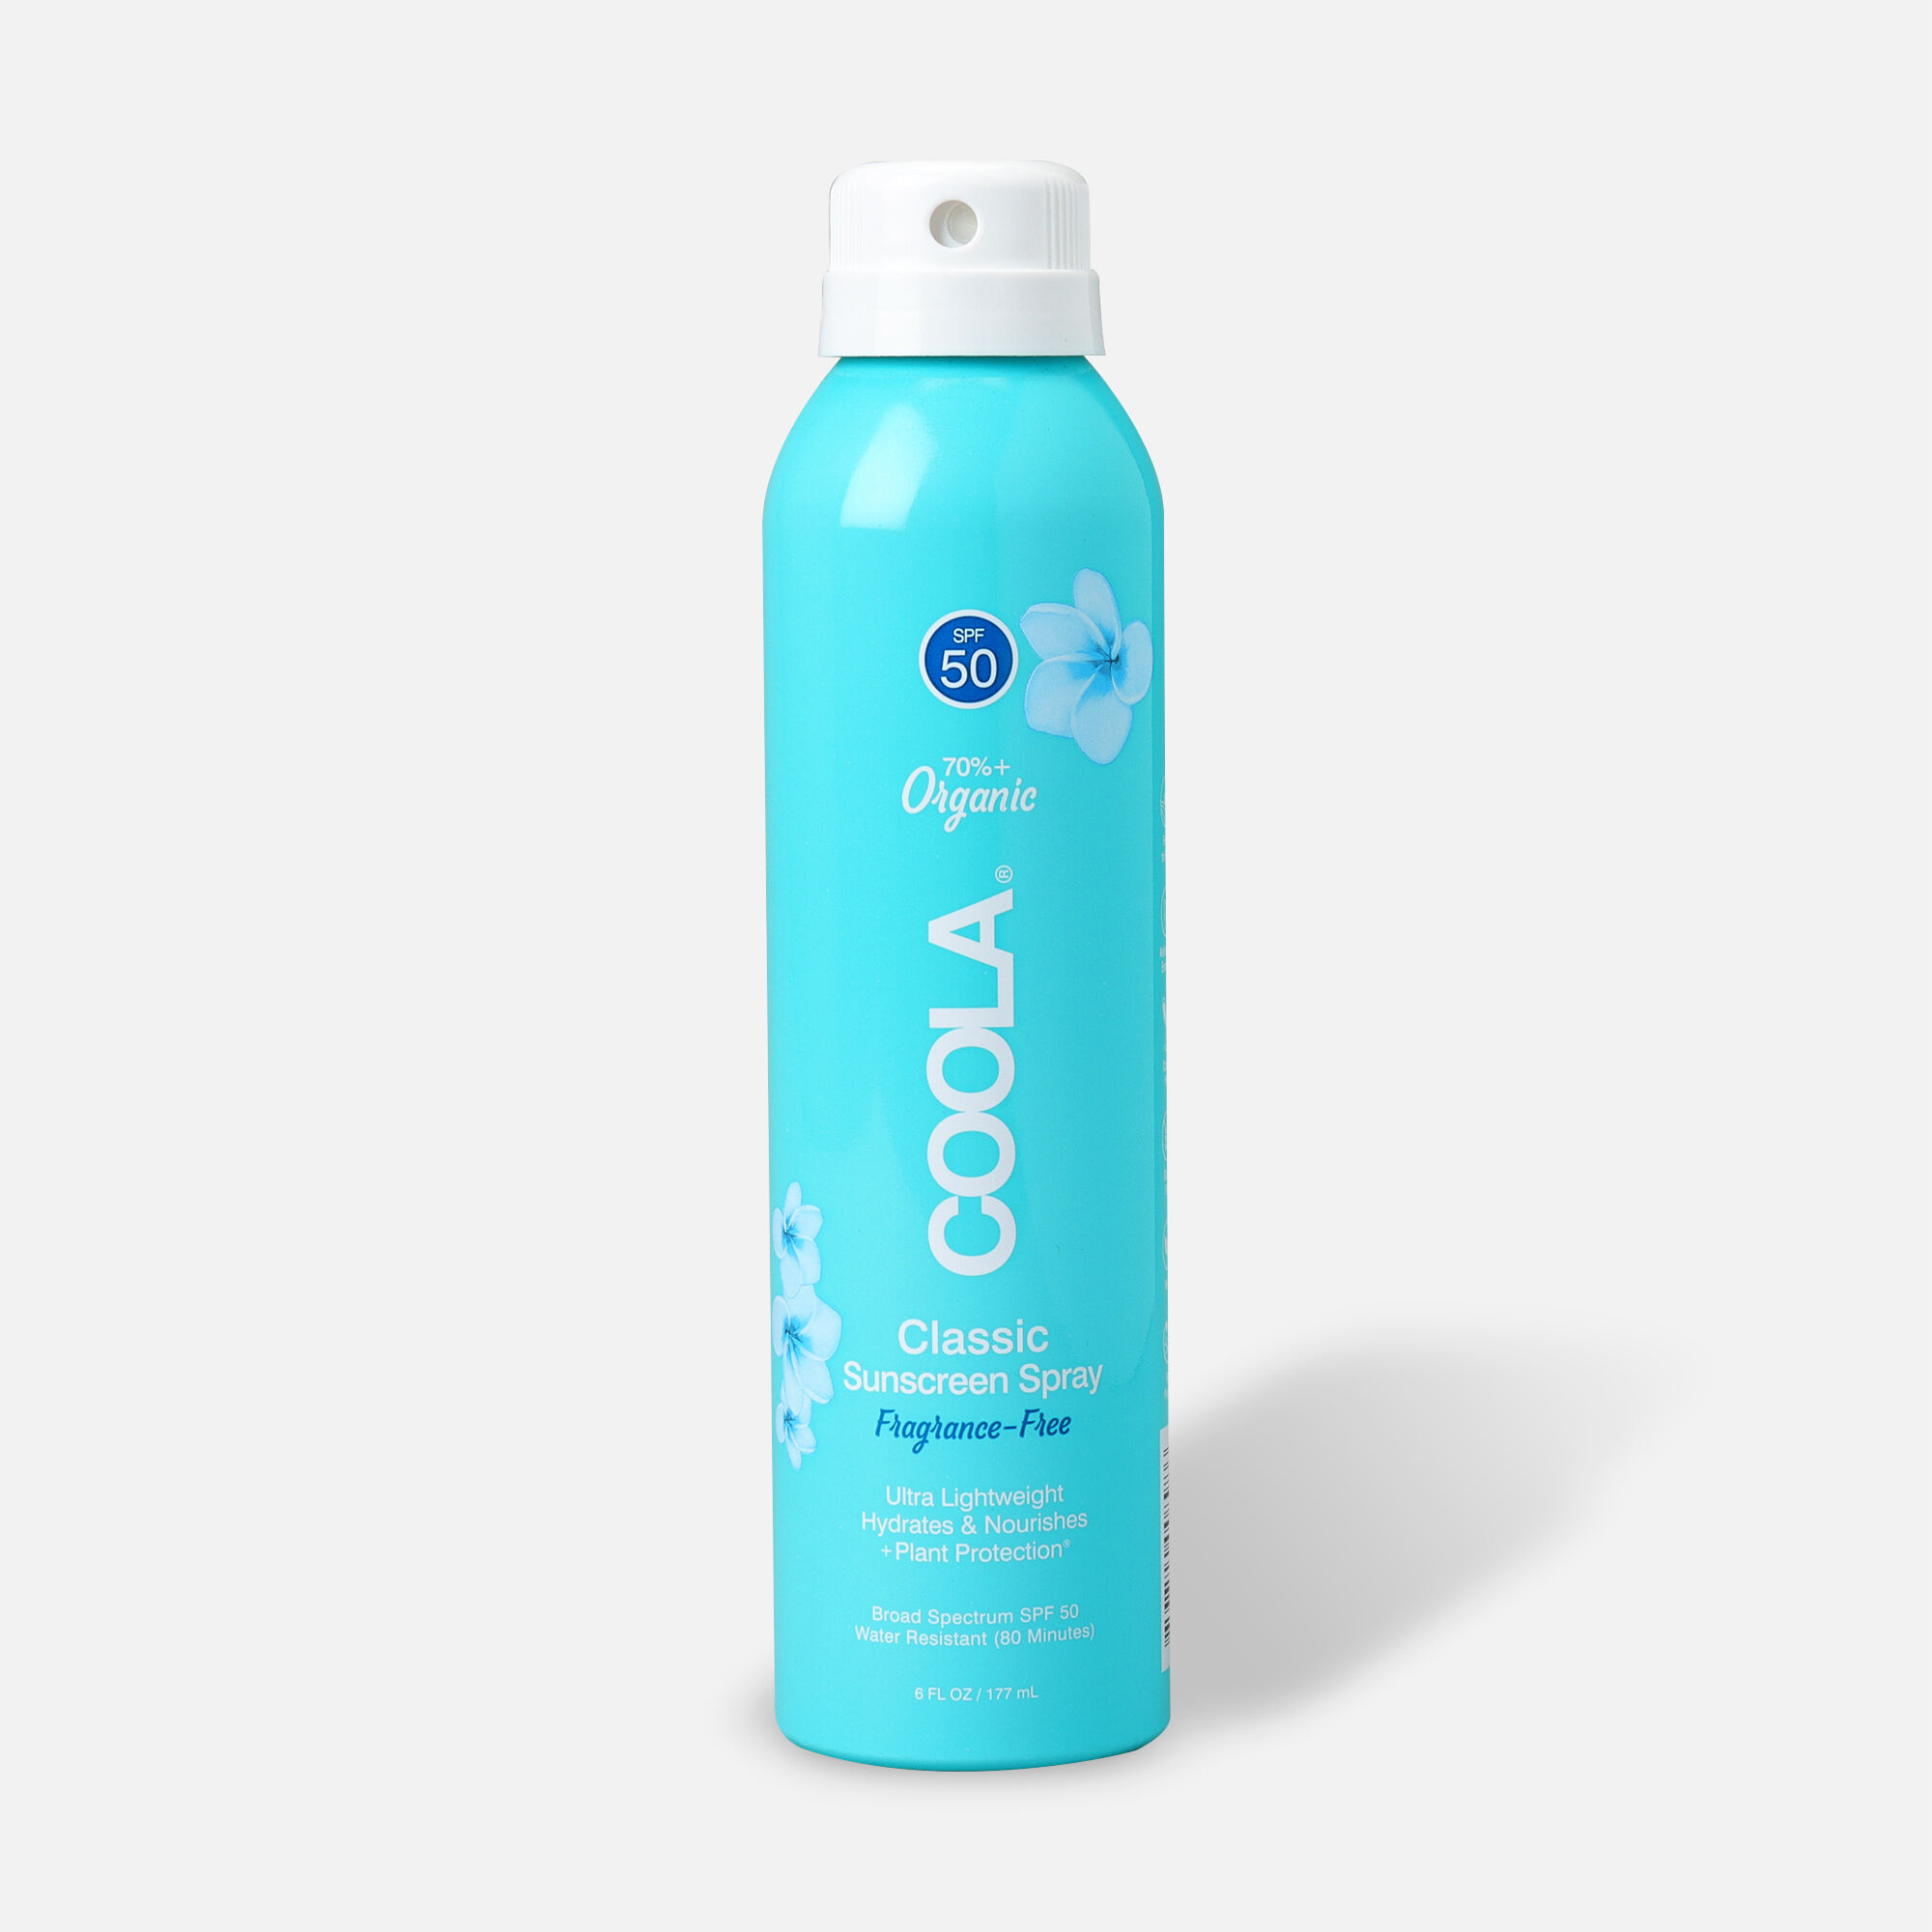 does coola sunscreen work